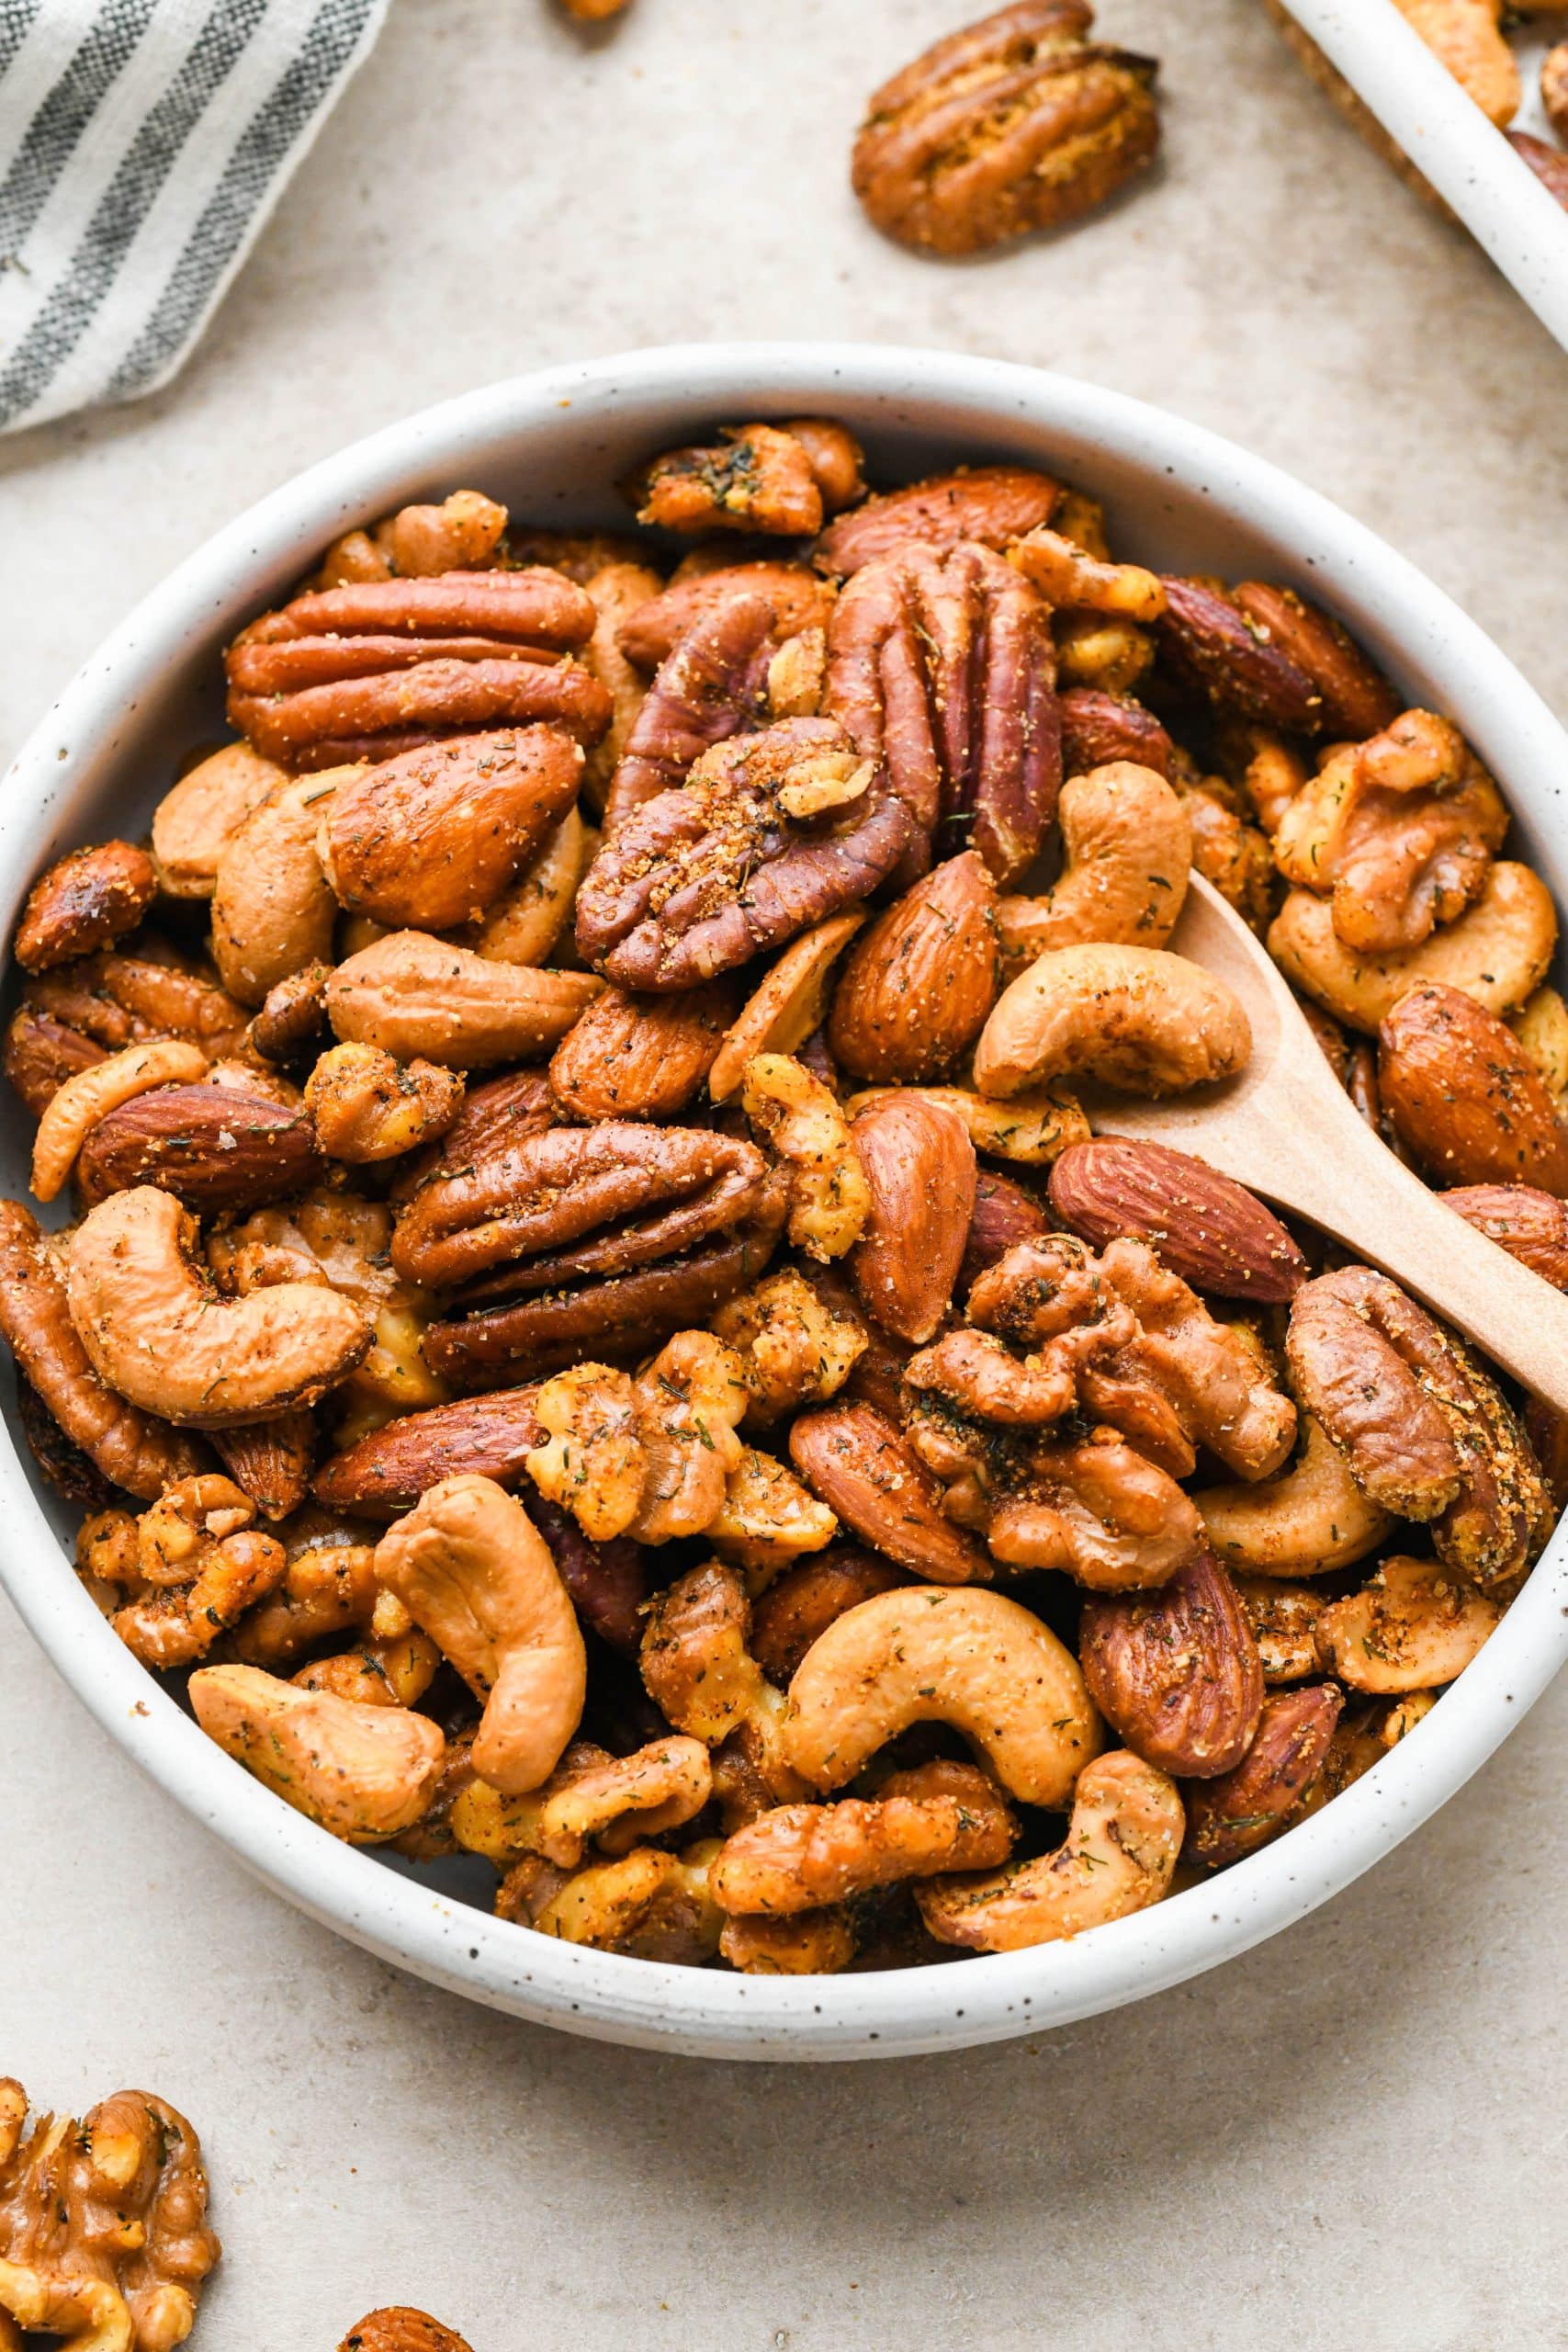 Spiced Roasted Nuts  Savory and delicious!